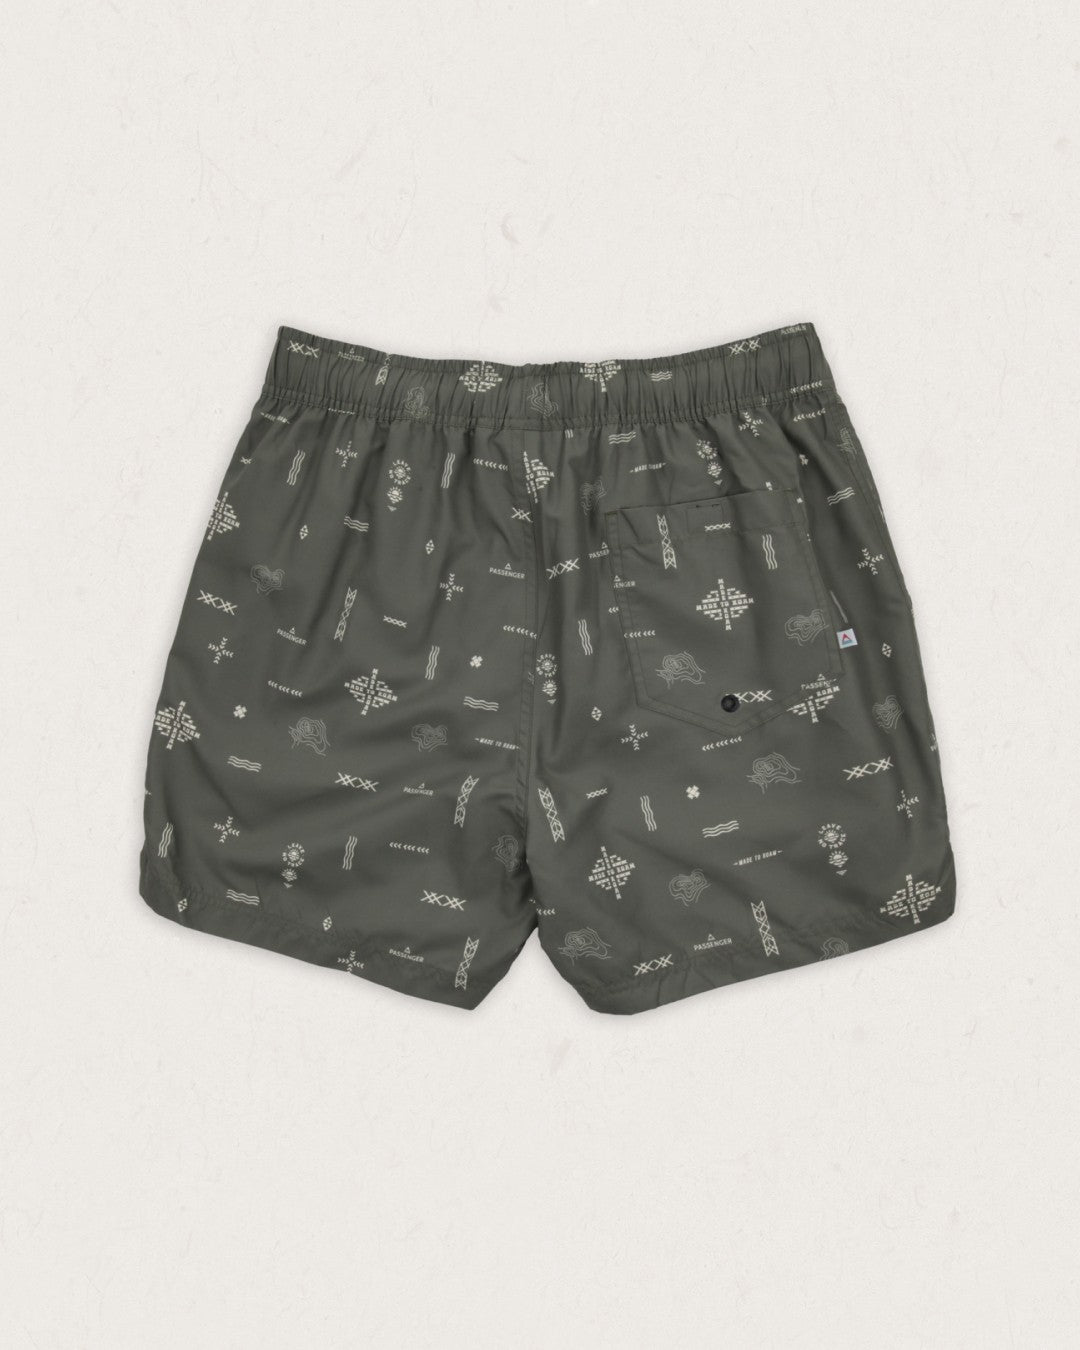 Cali Recycled Short - Olive Made To Roam